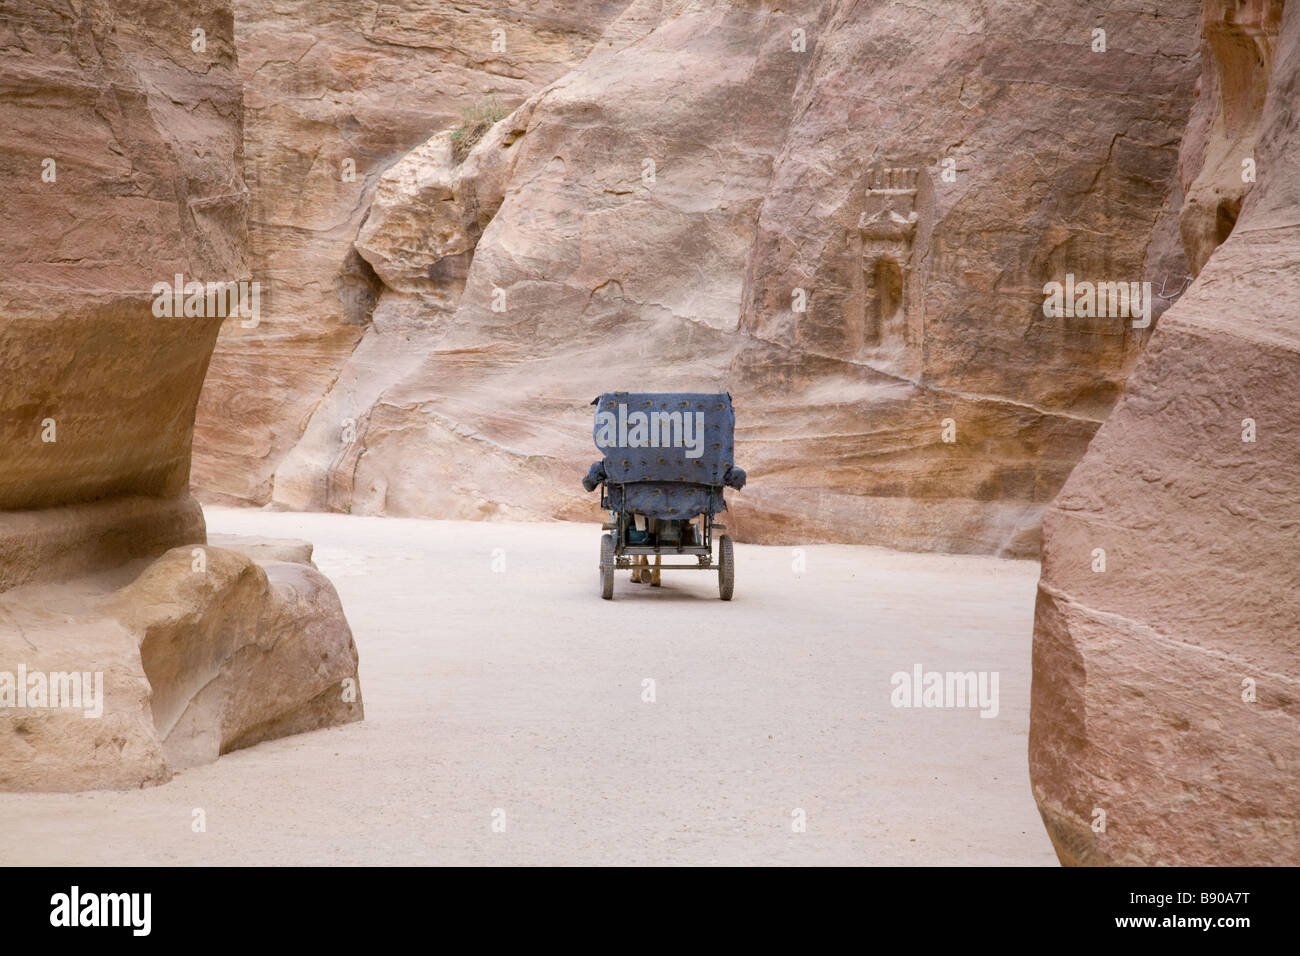 A horse and cart carriage making its way through the Siq at the entrance to Petra, Jordan Stock Photo